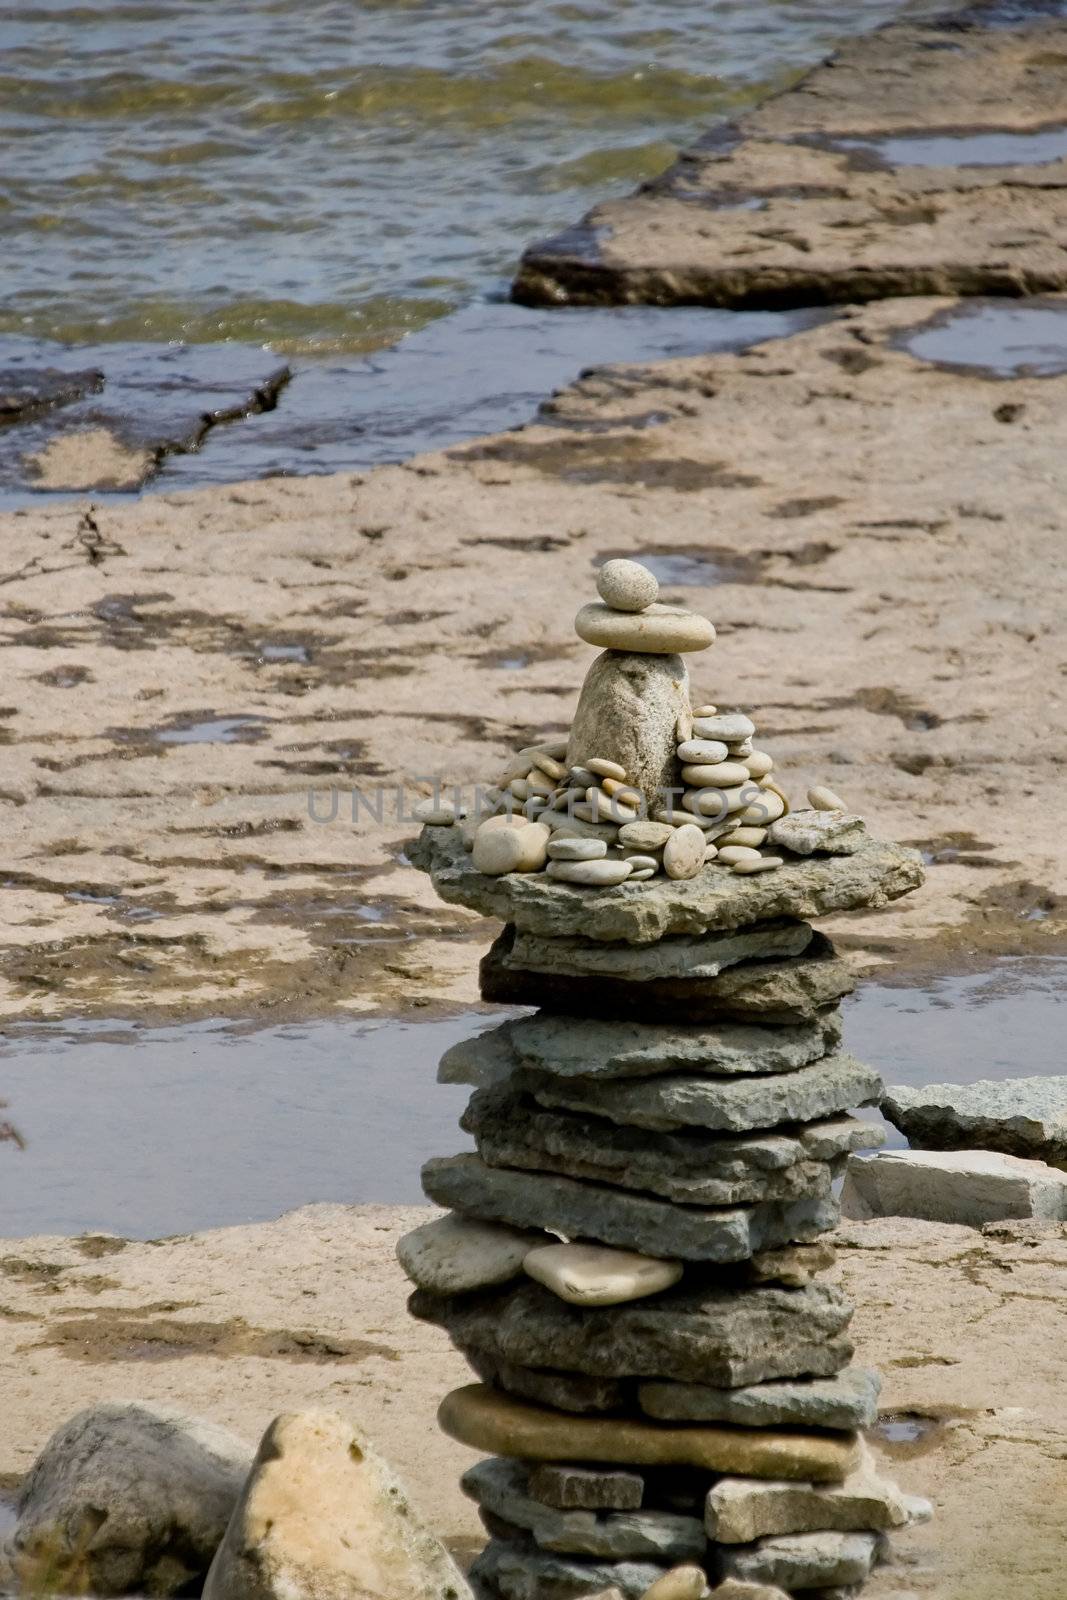 A statue of stones at the water's edge.